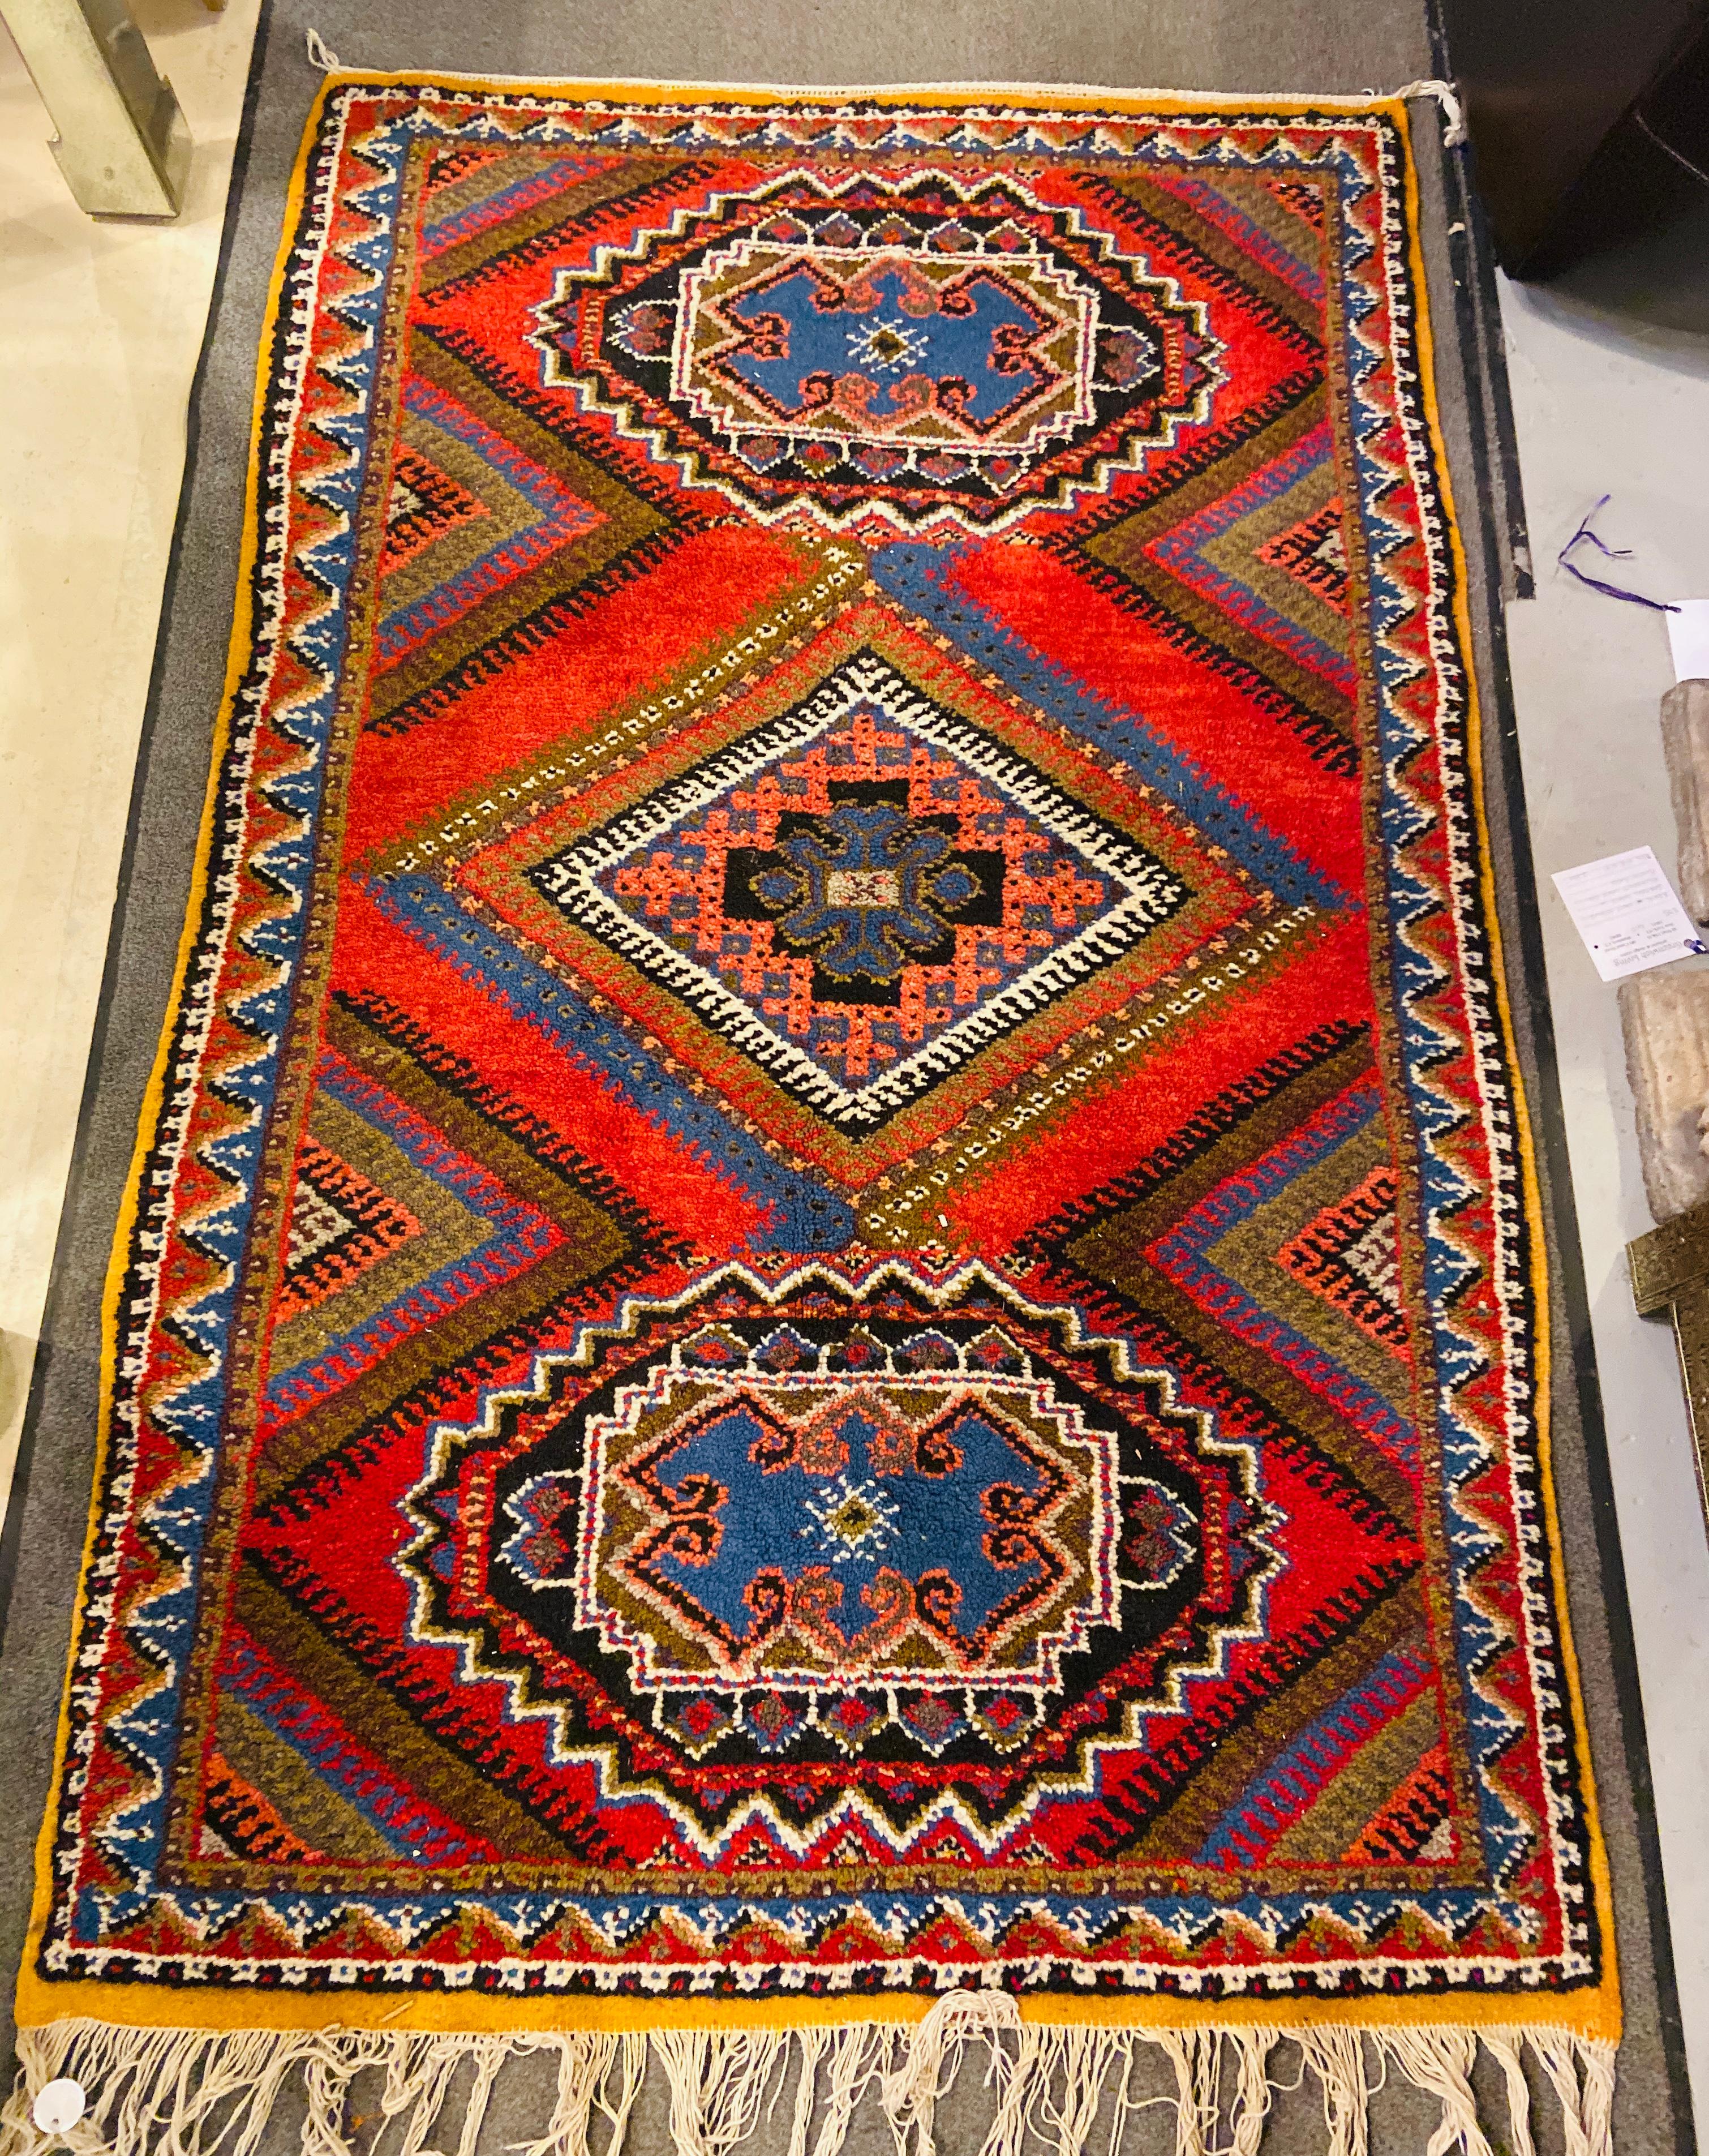 This is a vibrant Moroccan handmade rug featuring a rich and intricate design typical of traditional Berber craftsmanship. The rug has a rectangular shape and showcases a dominant color palette of reds, blues, dark greens, and whites.  At the